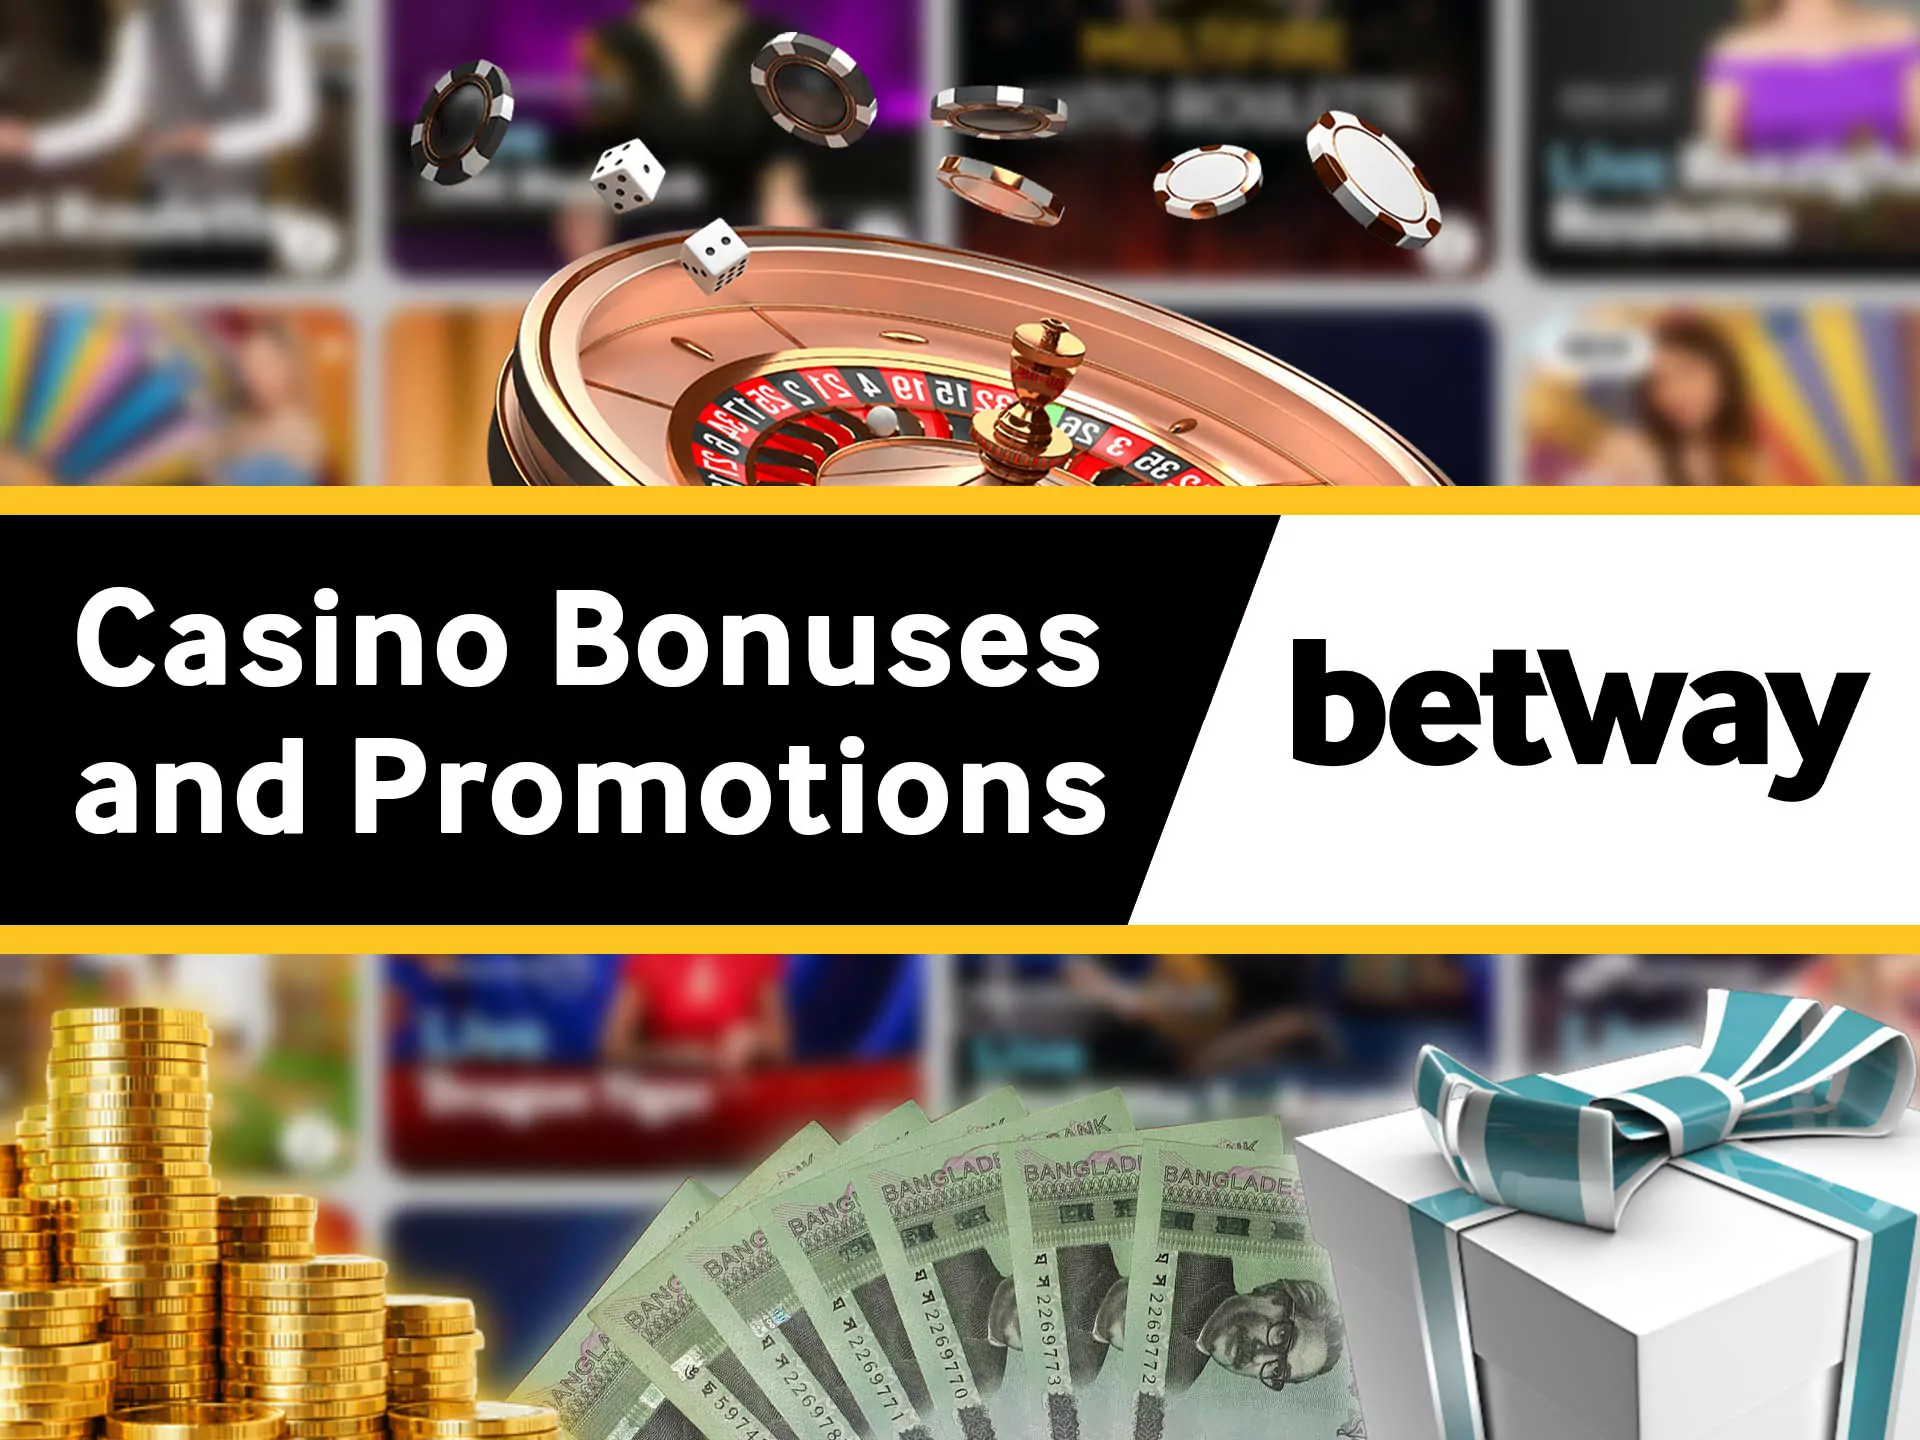 Don't forget to check for new promotions at Betway.